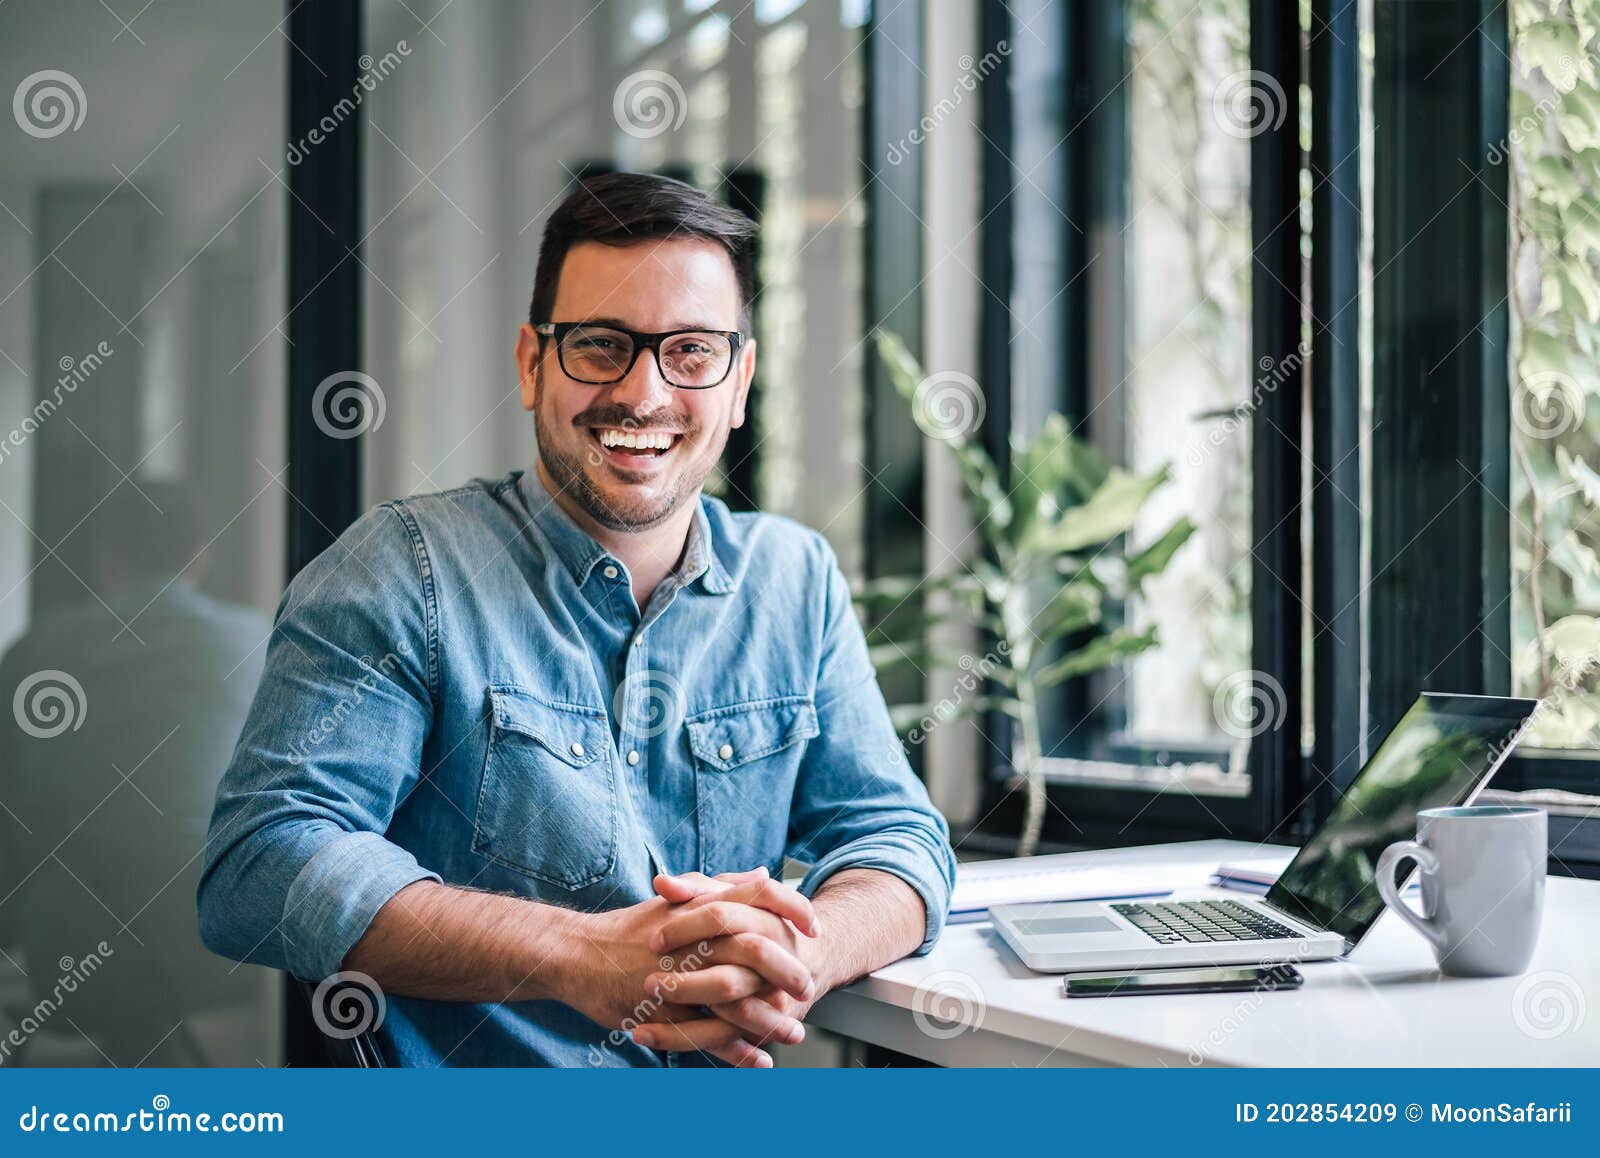 portrait of young smiling happy handsome successful businessman entrepreneur freelancer working from home office on laptop